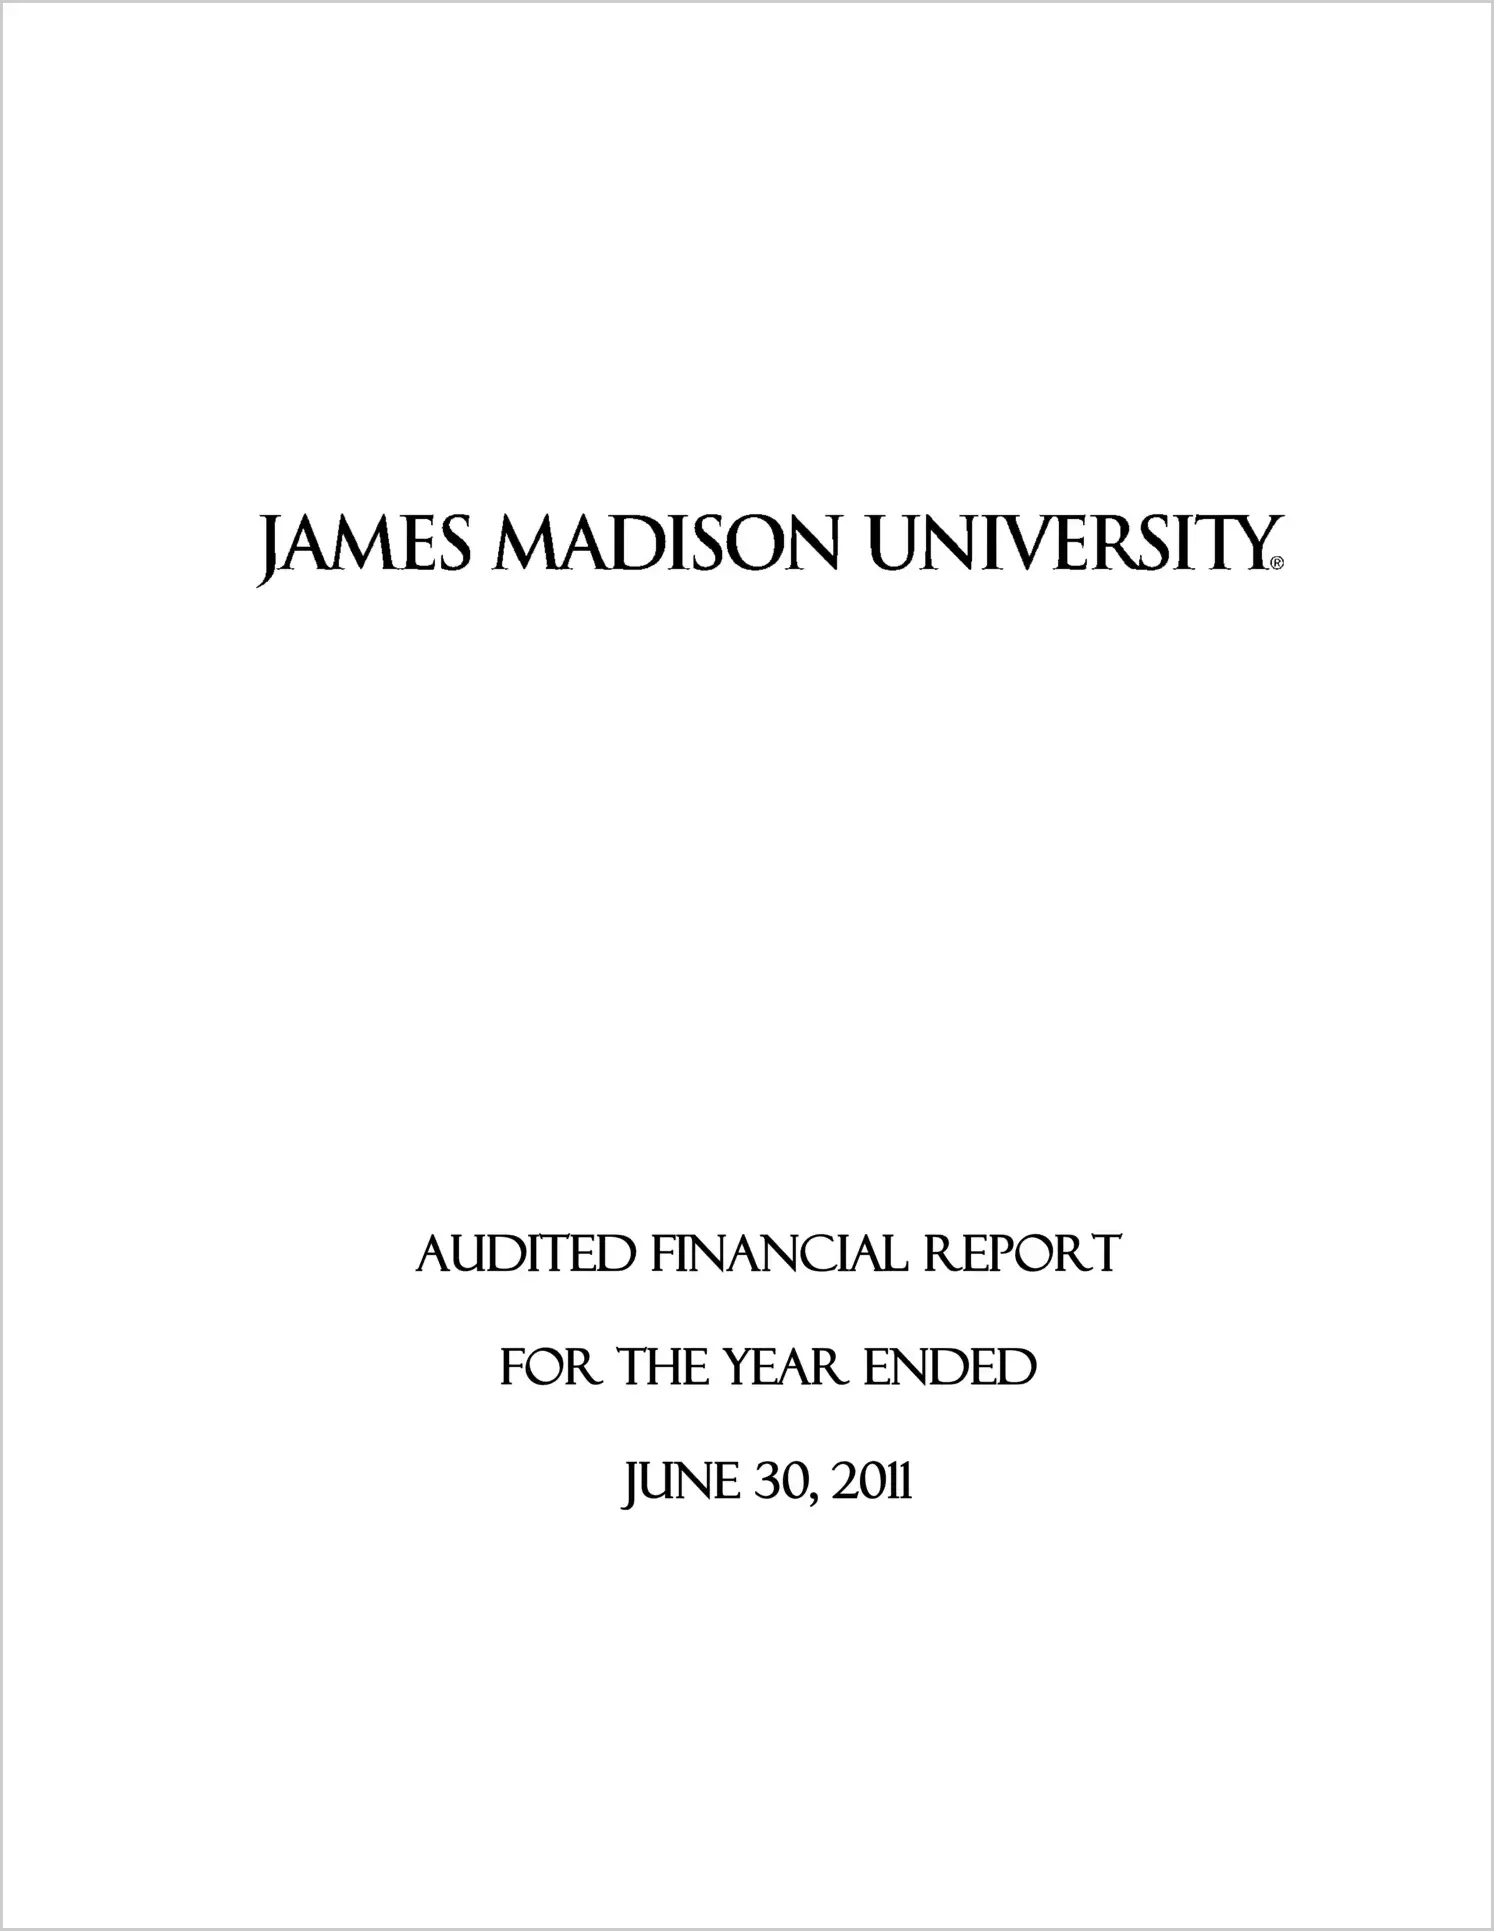 James Madison University Financial Statements for the year ended June 30, 2011